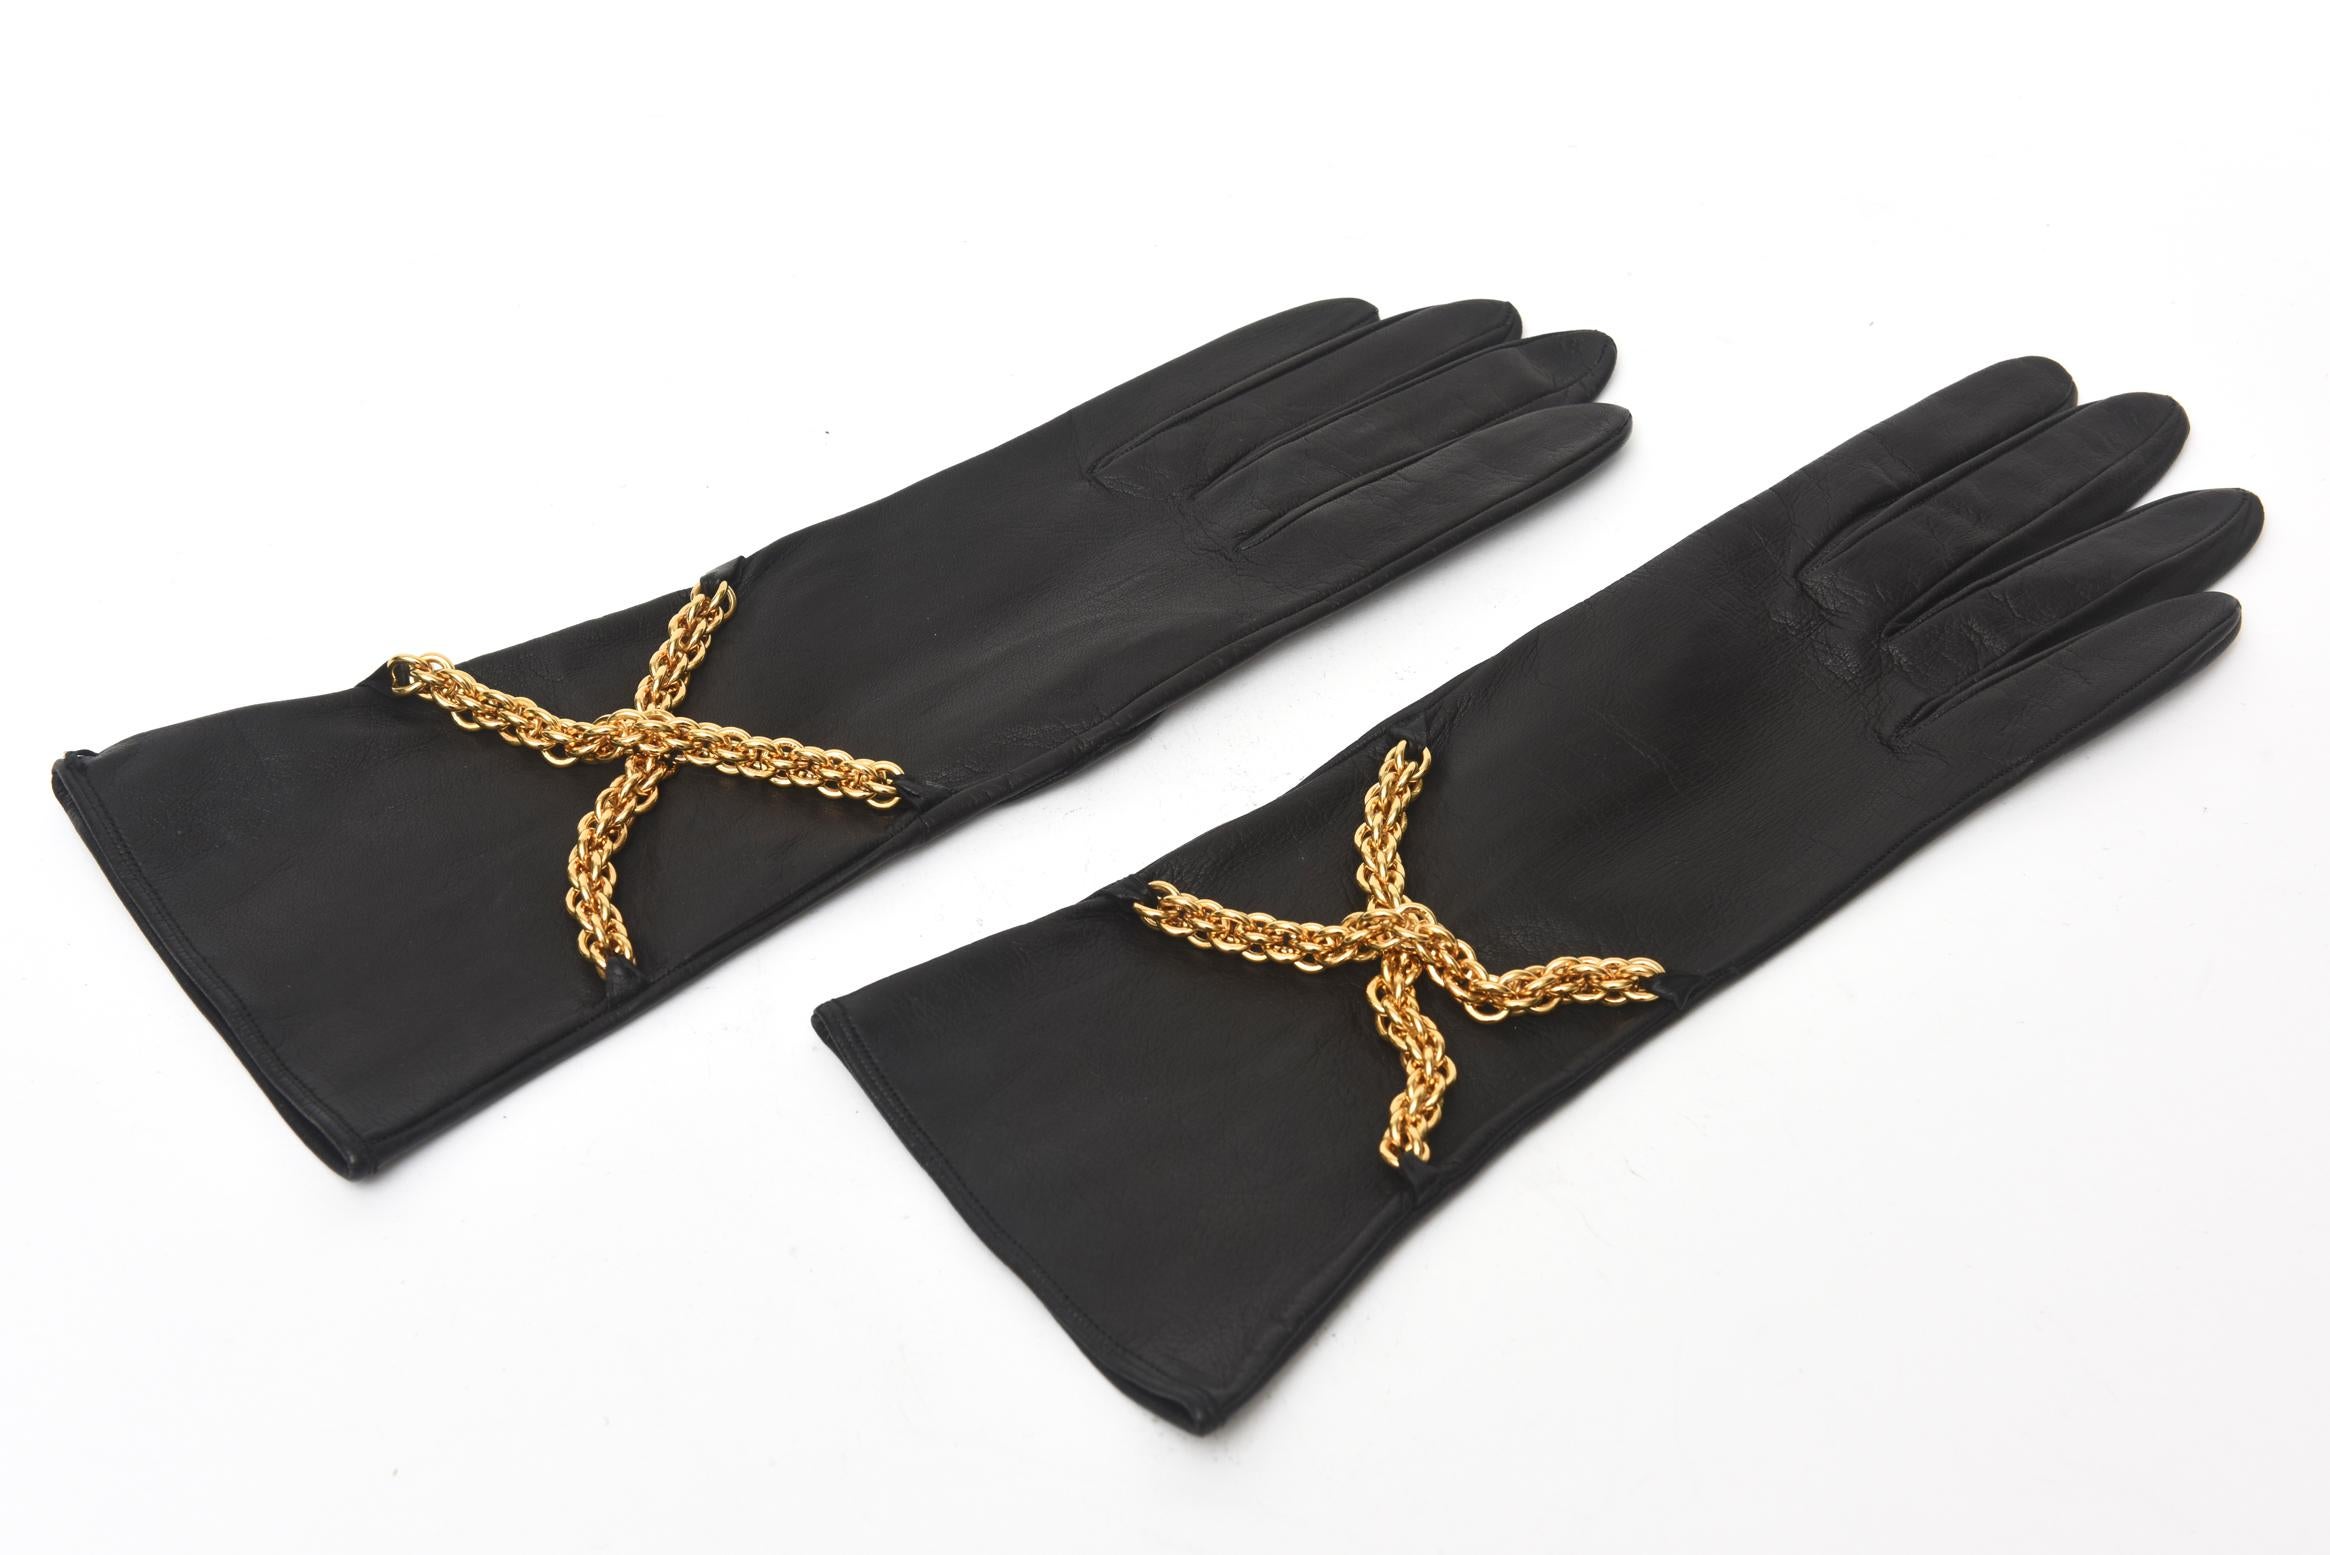 These stunning and truly never worn black leather Paloma Picasso gloves have criss cross brass chains on the front and a black silk lining on the interior. They are a size 6.5 as shown in the photos. They have the Paloma label inside and were made